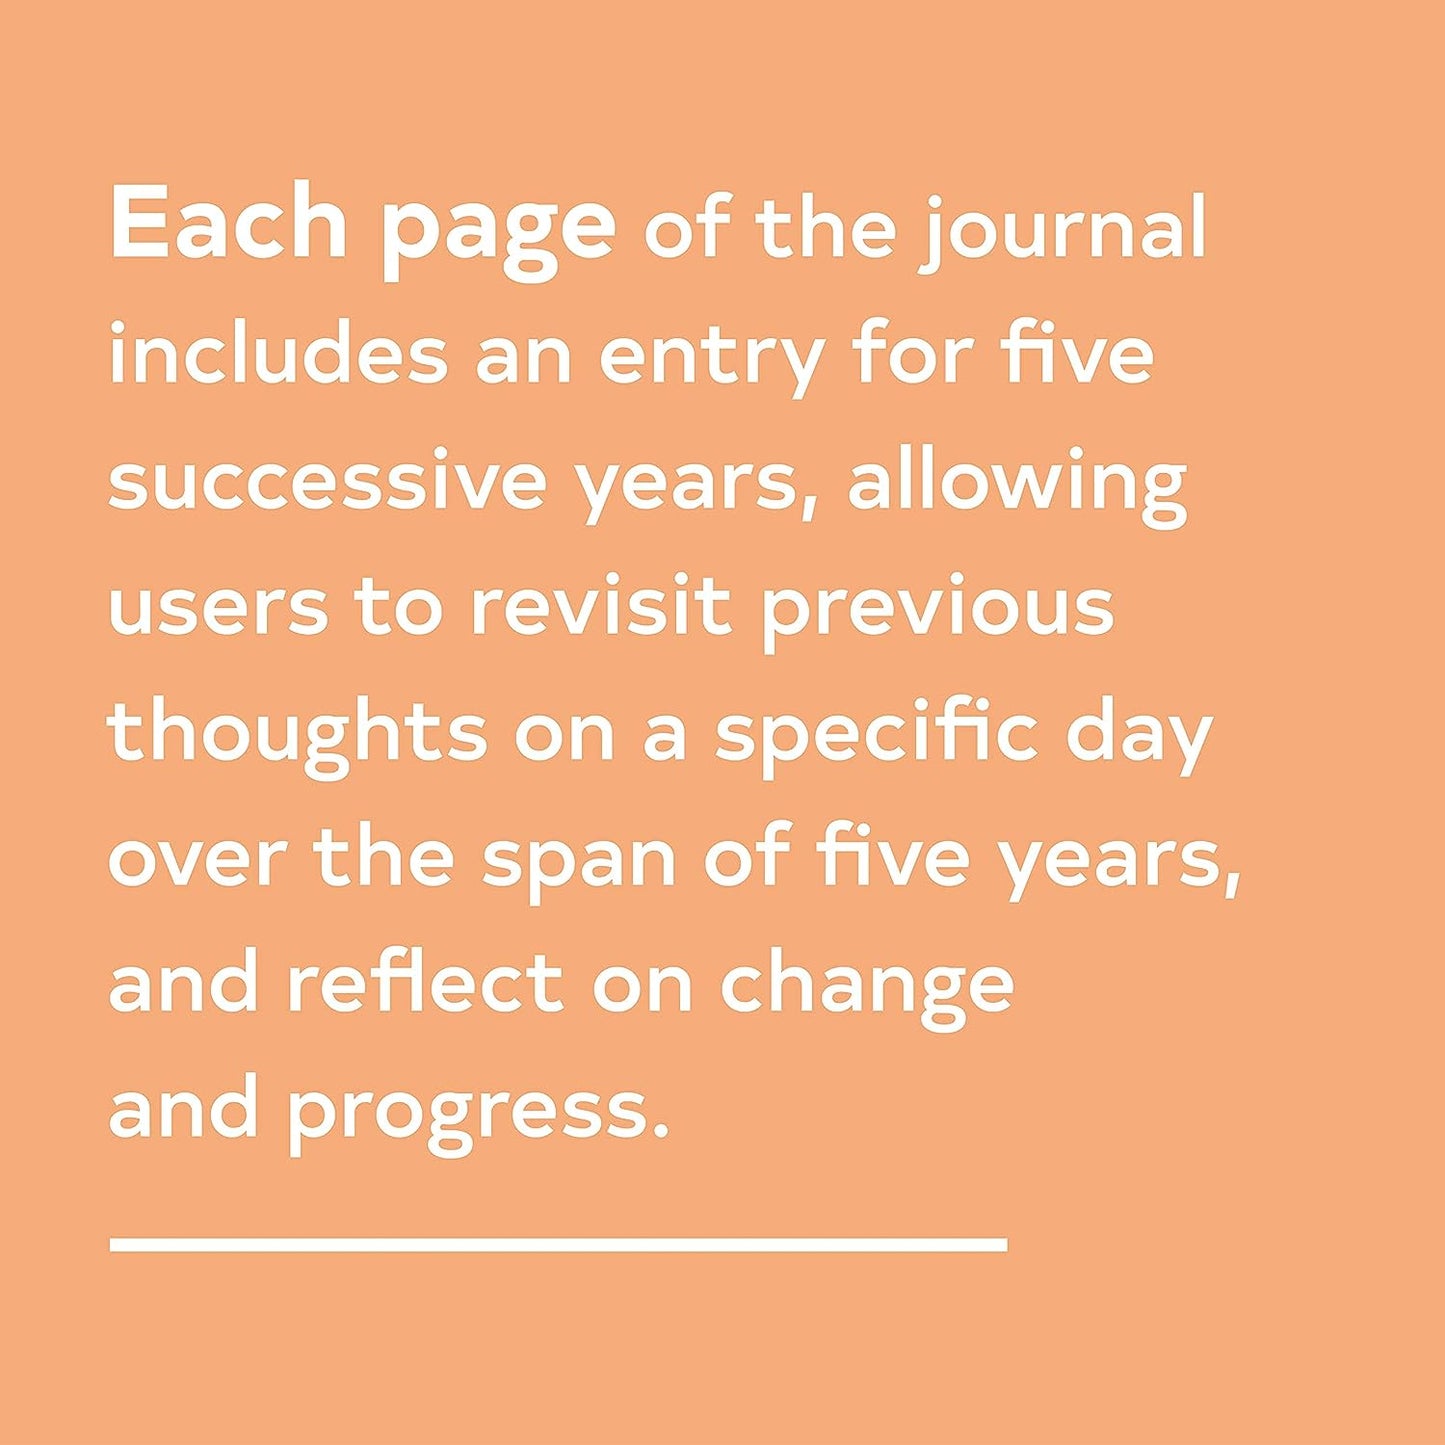 Modern One Line a Day: A Five-Year Memory Journal By Moglea